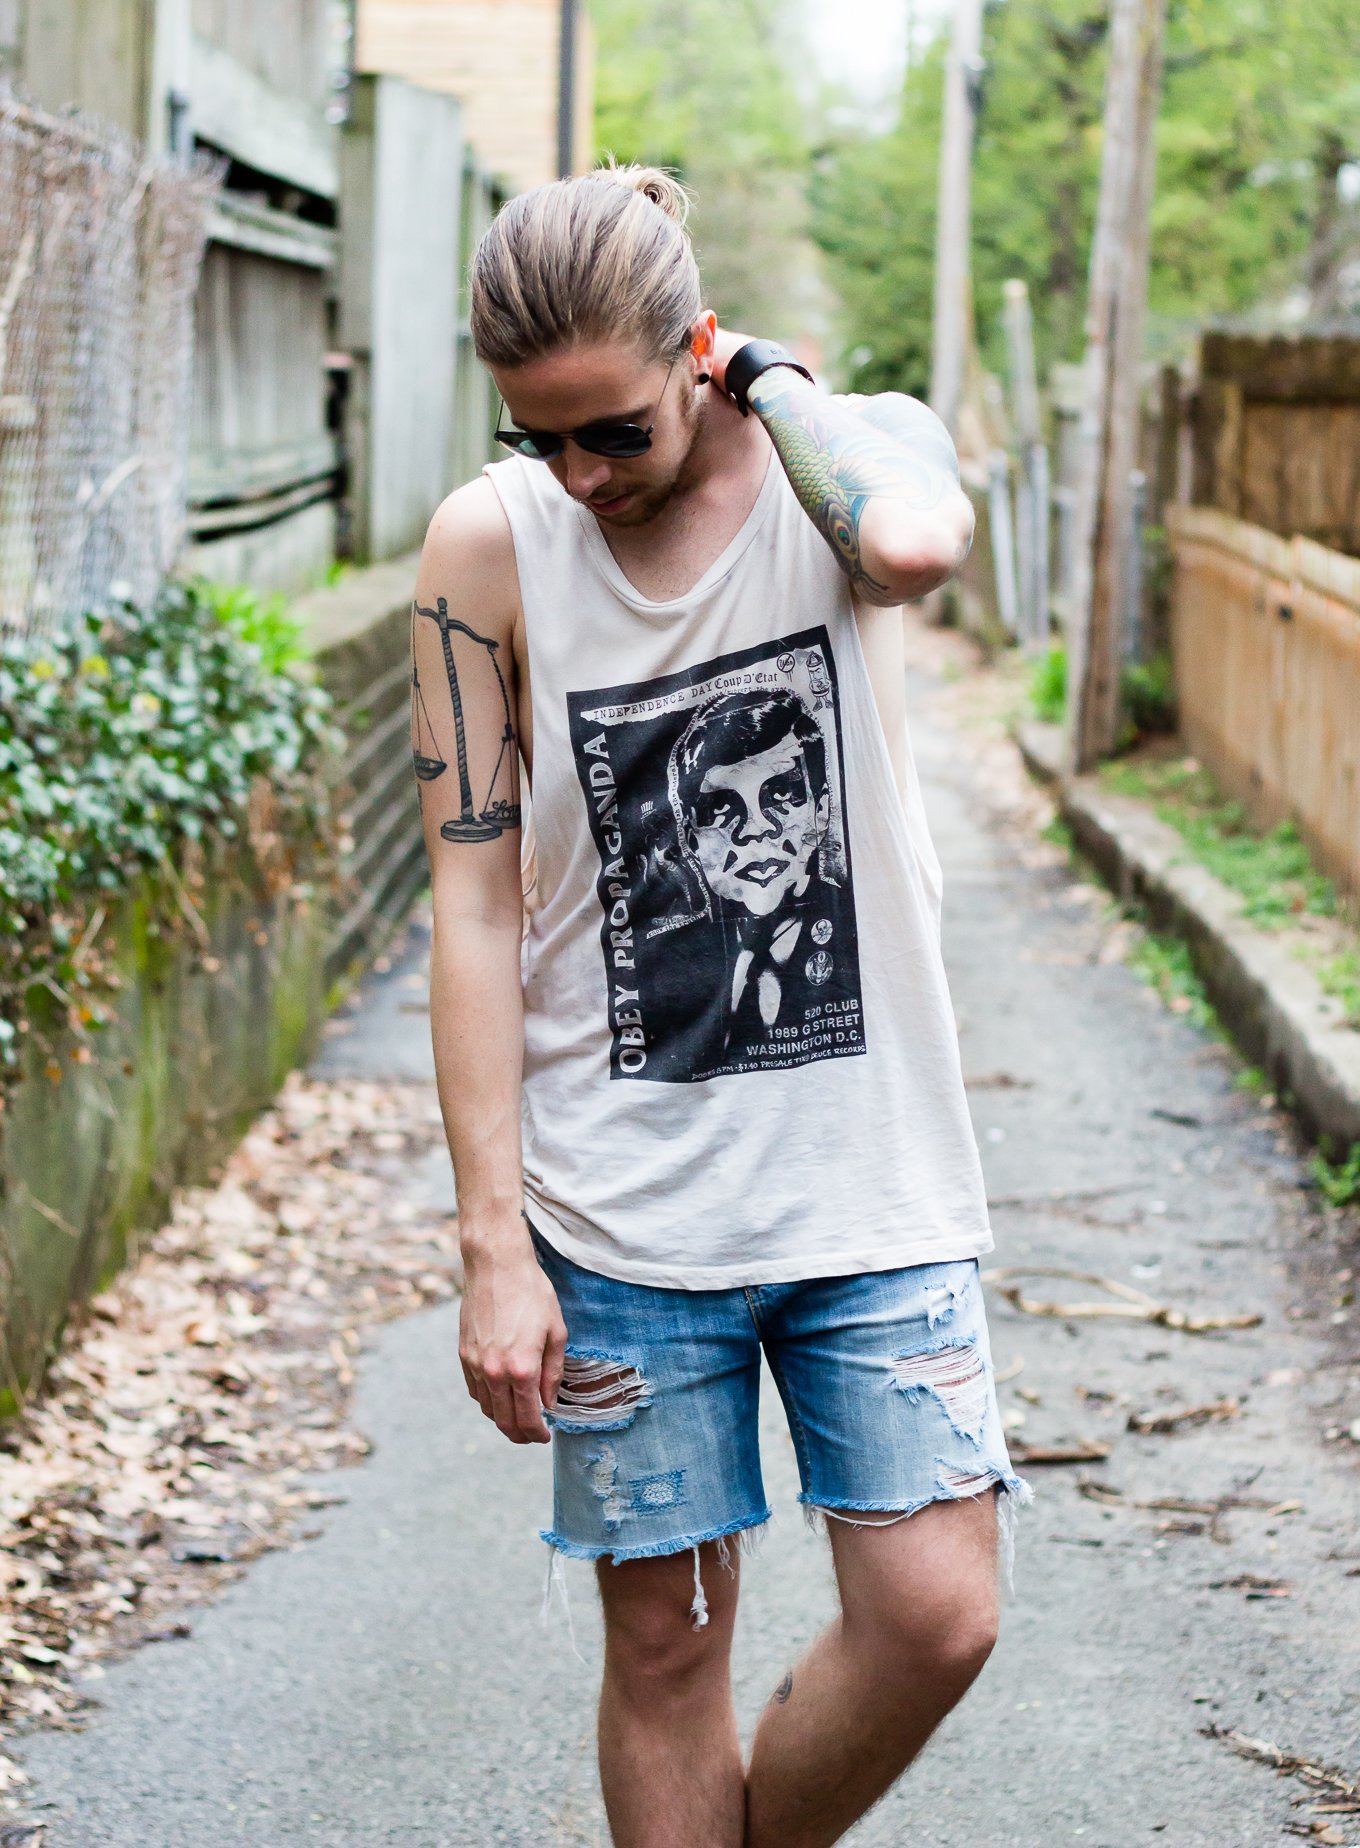 Obey Tank and Levi's Denim Shorts on The Kentucky Gent